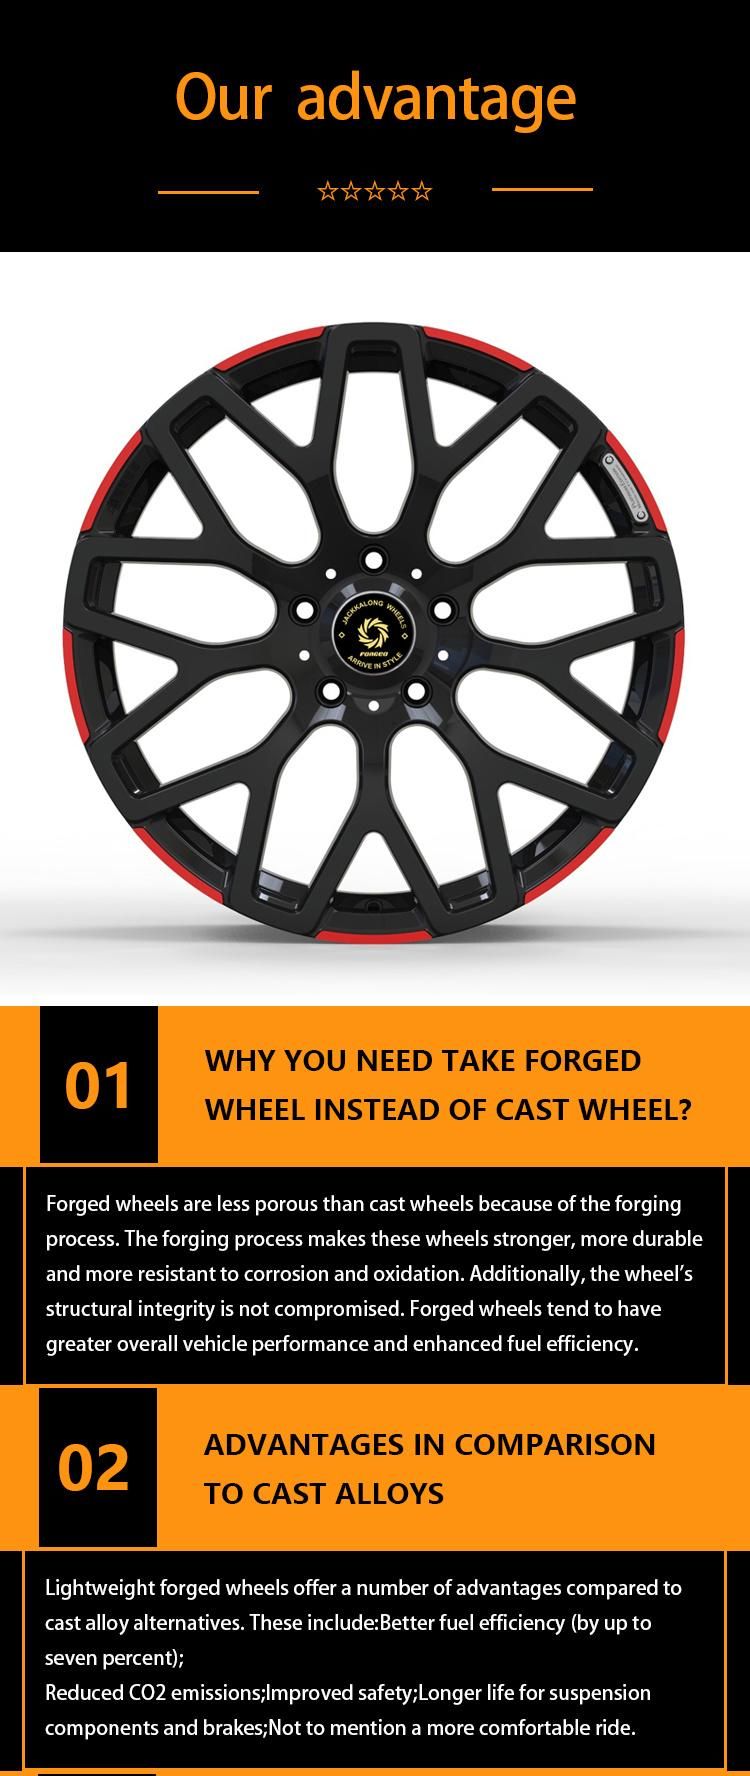 1 Piece Forged T6061 Alloy Rims Sport Aluminum Wheels for Customized T6061 Material with Mag Rims with Black+Milling Engravings 